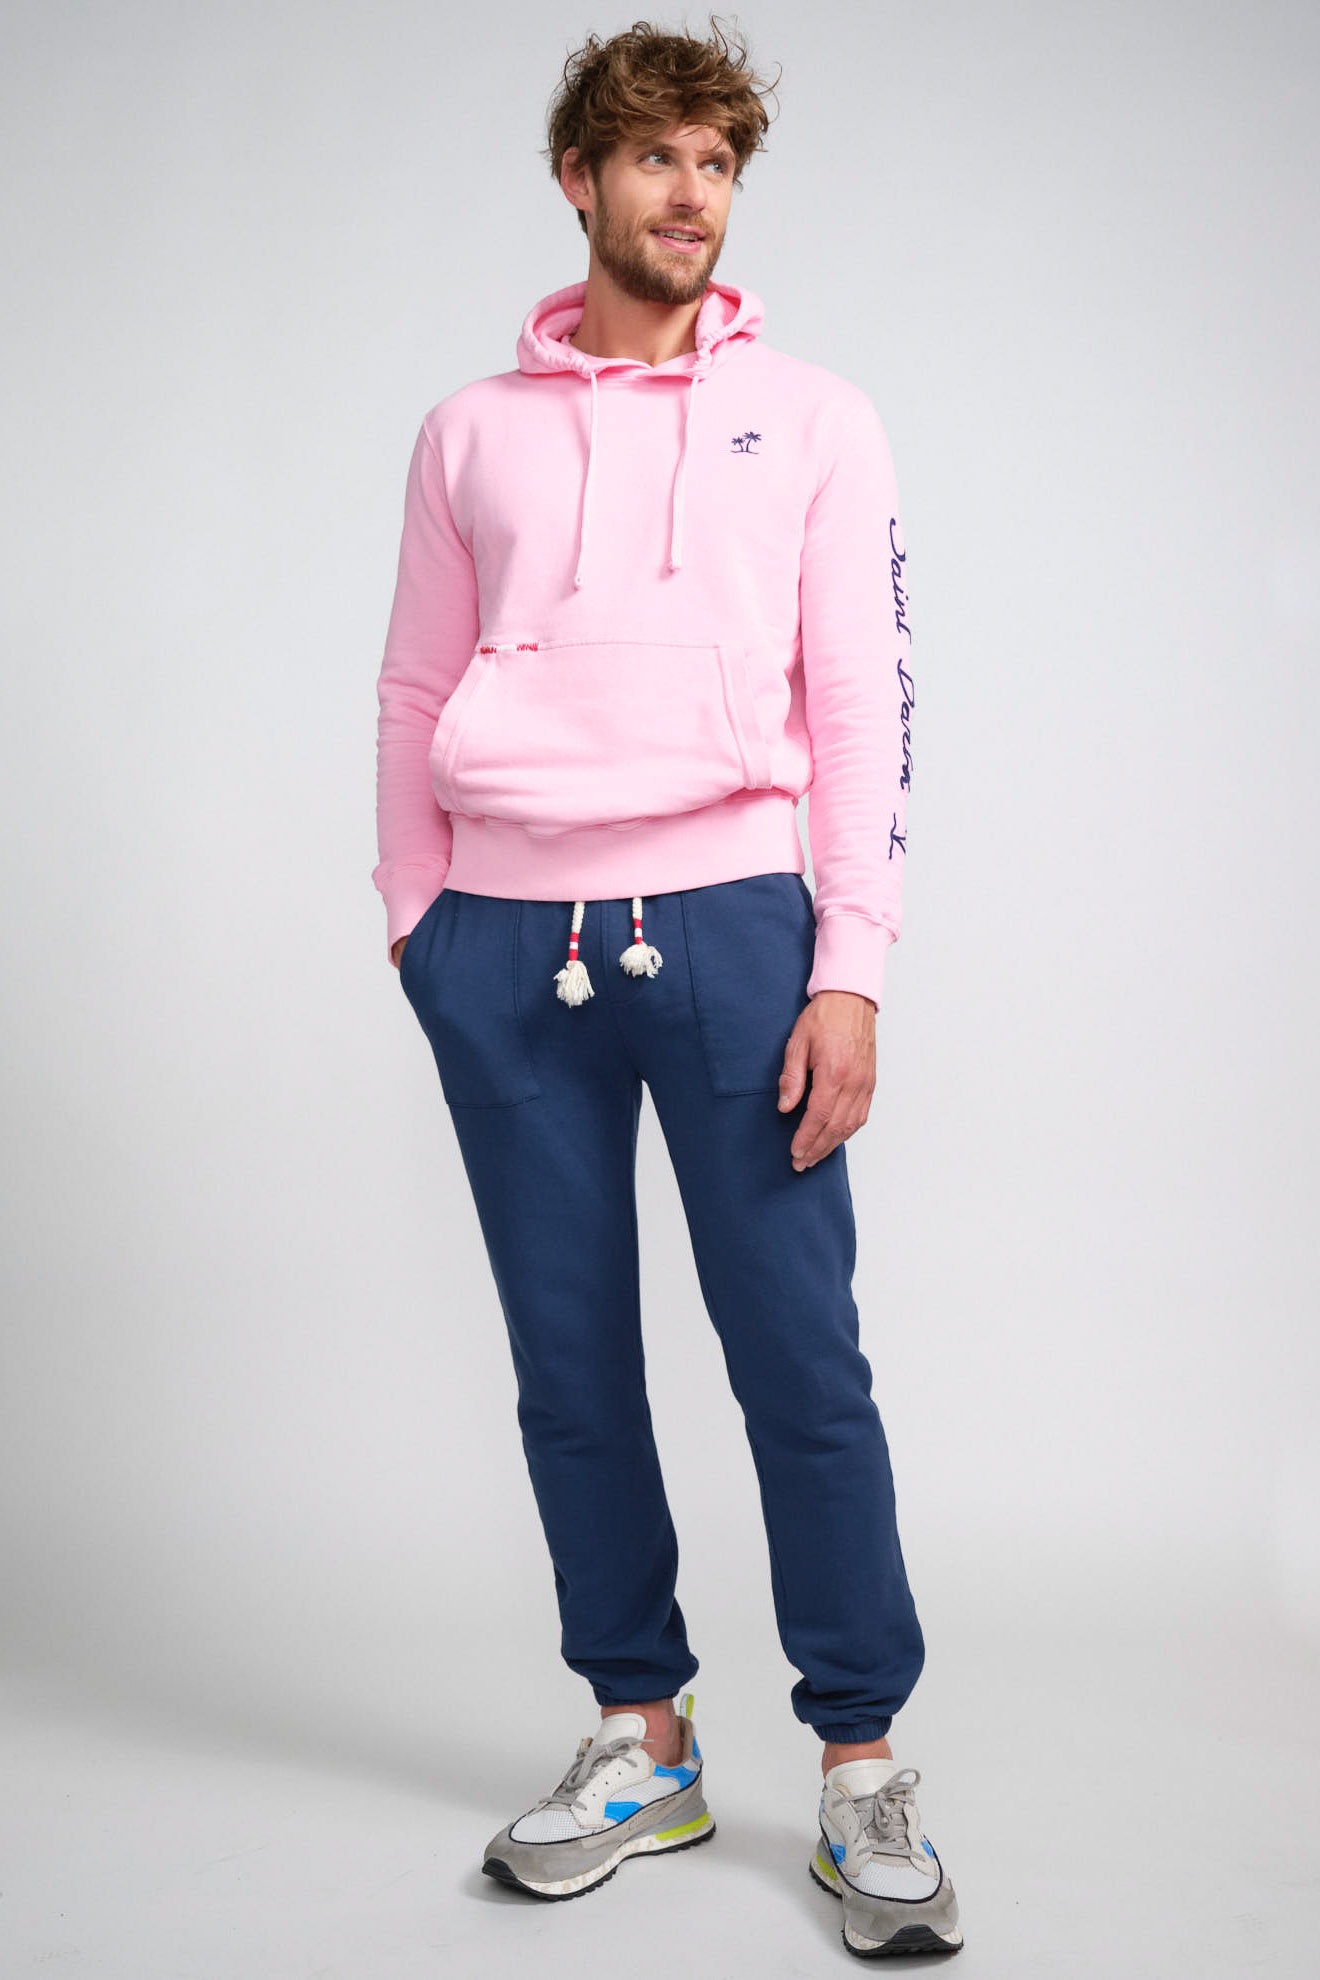 st.barth hoodie pink branded cotton model style